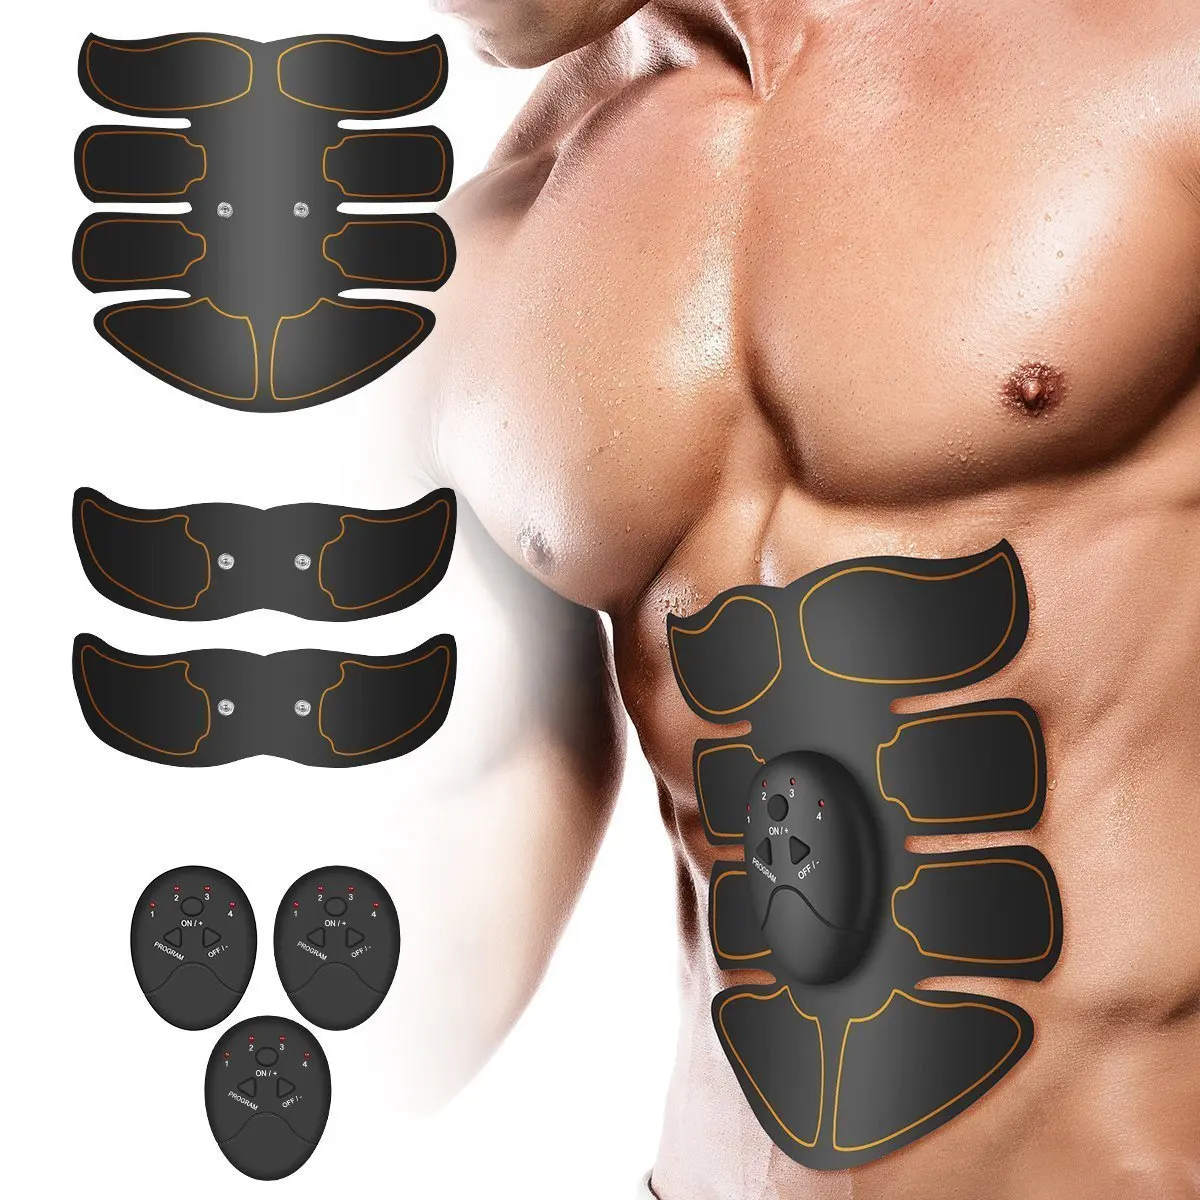 

EMS Wireless ABS Electric Pulse Treatment Fitness Massager Abdominal Waist Body Trainer Muscle Stimulator Intensive Exerciser